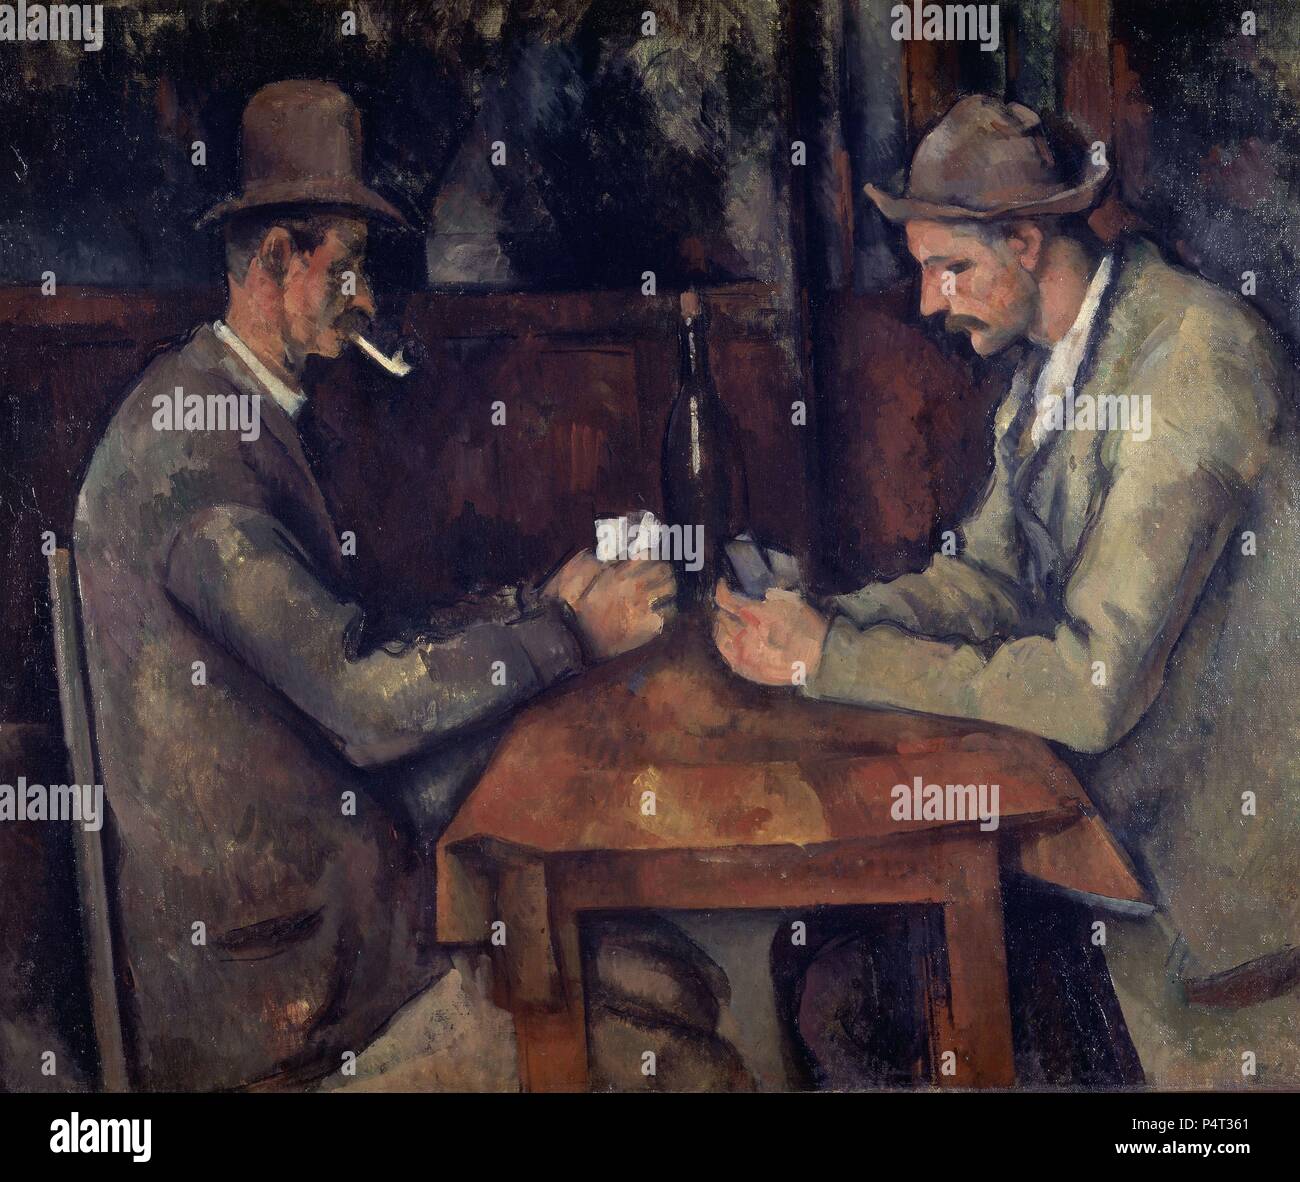 'Card Players', 1894-1895, Oil on canvas, 47,5 × 57 cm. Author: Paul Cézanne (1839-1906). Location: MUSEE D'ORSAY, FRANCE. Stock Photo